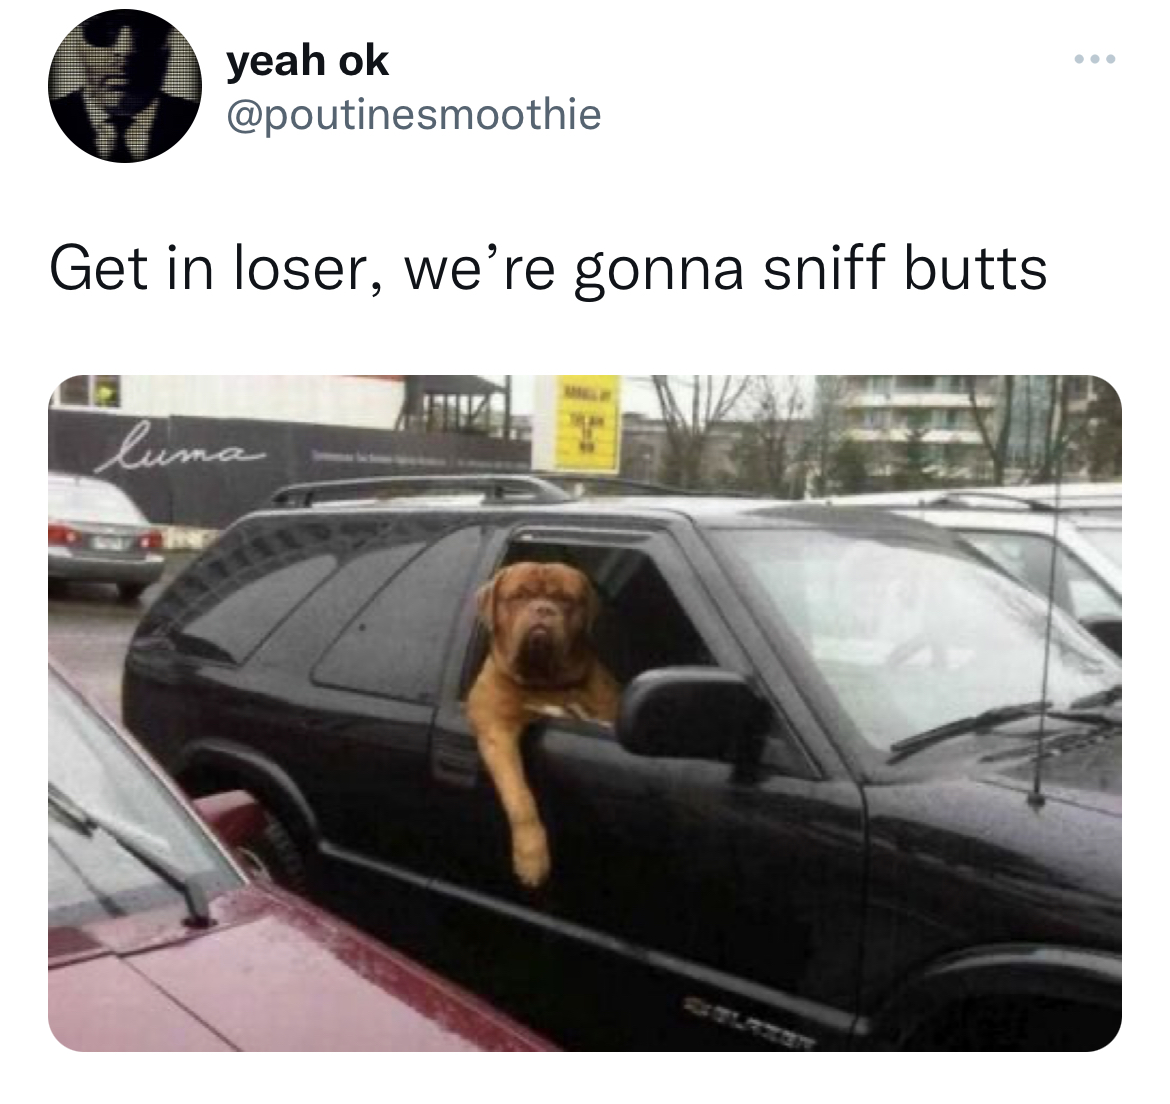 Funny tweets - car like a boss - yeah ok Get in loser, we're gonna sniff butts luma